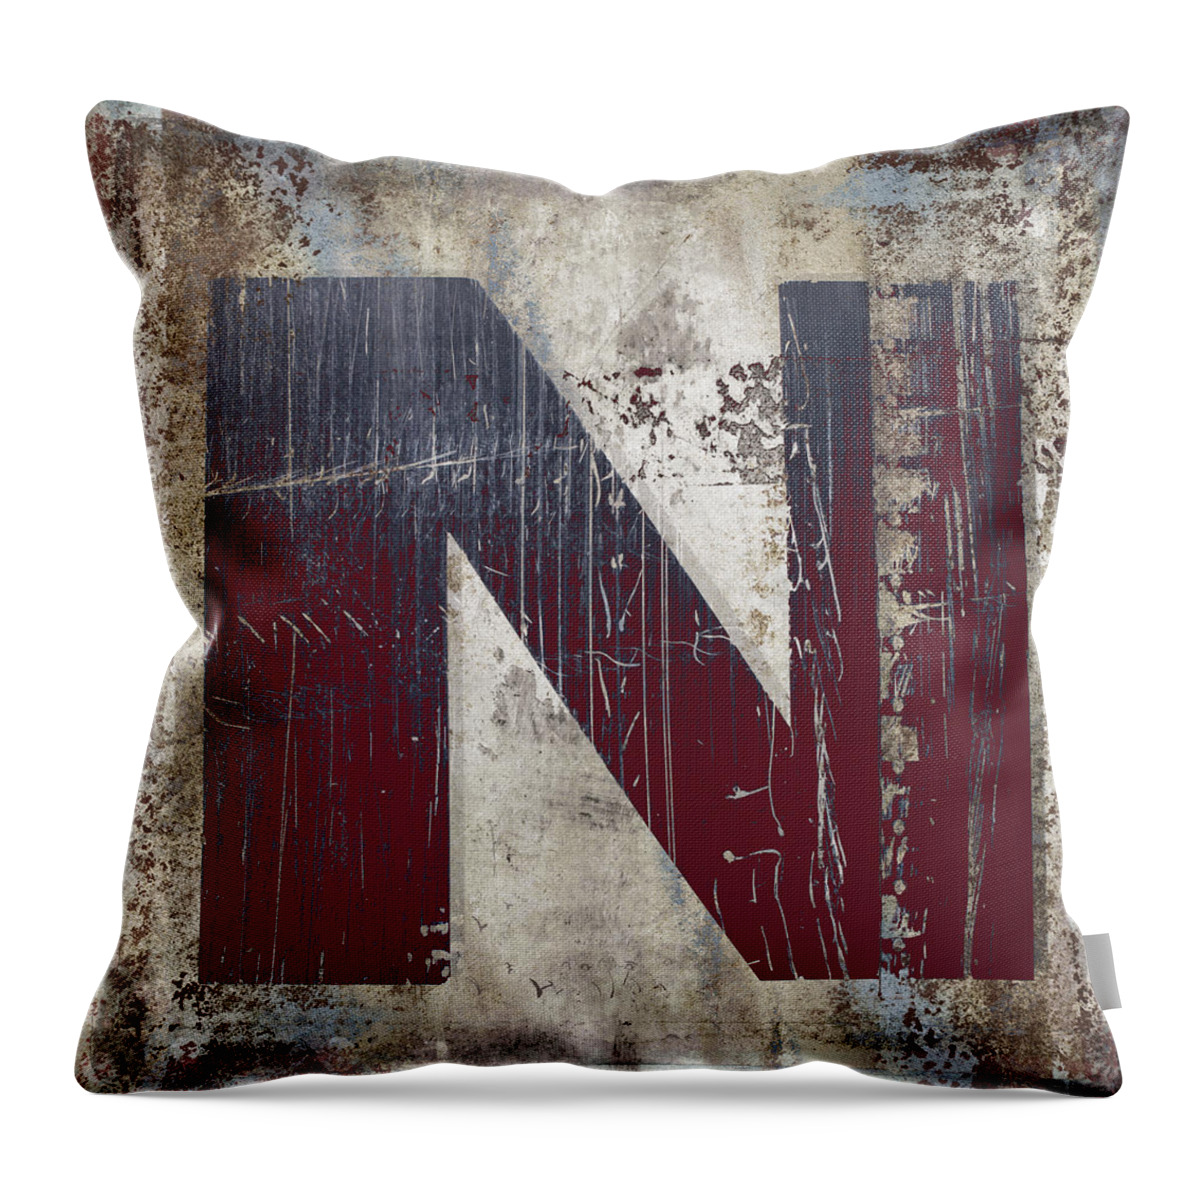 Industrial Throw Pillow featuring the photograph Industrial N by Carol Leigh